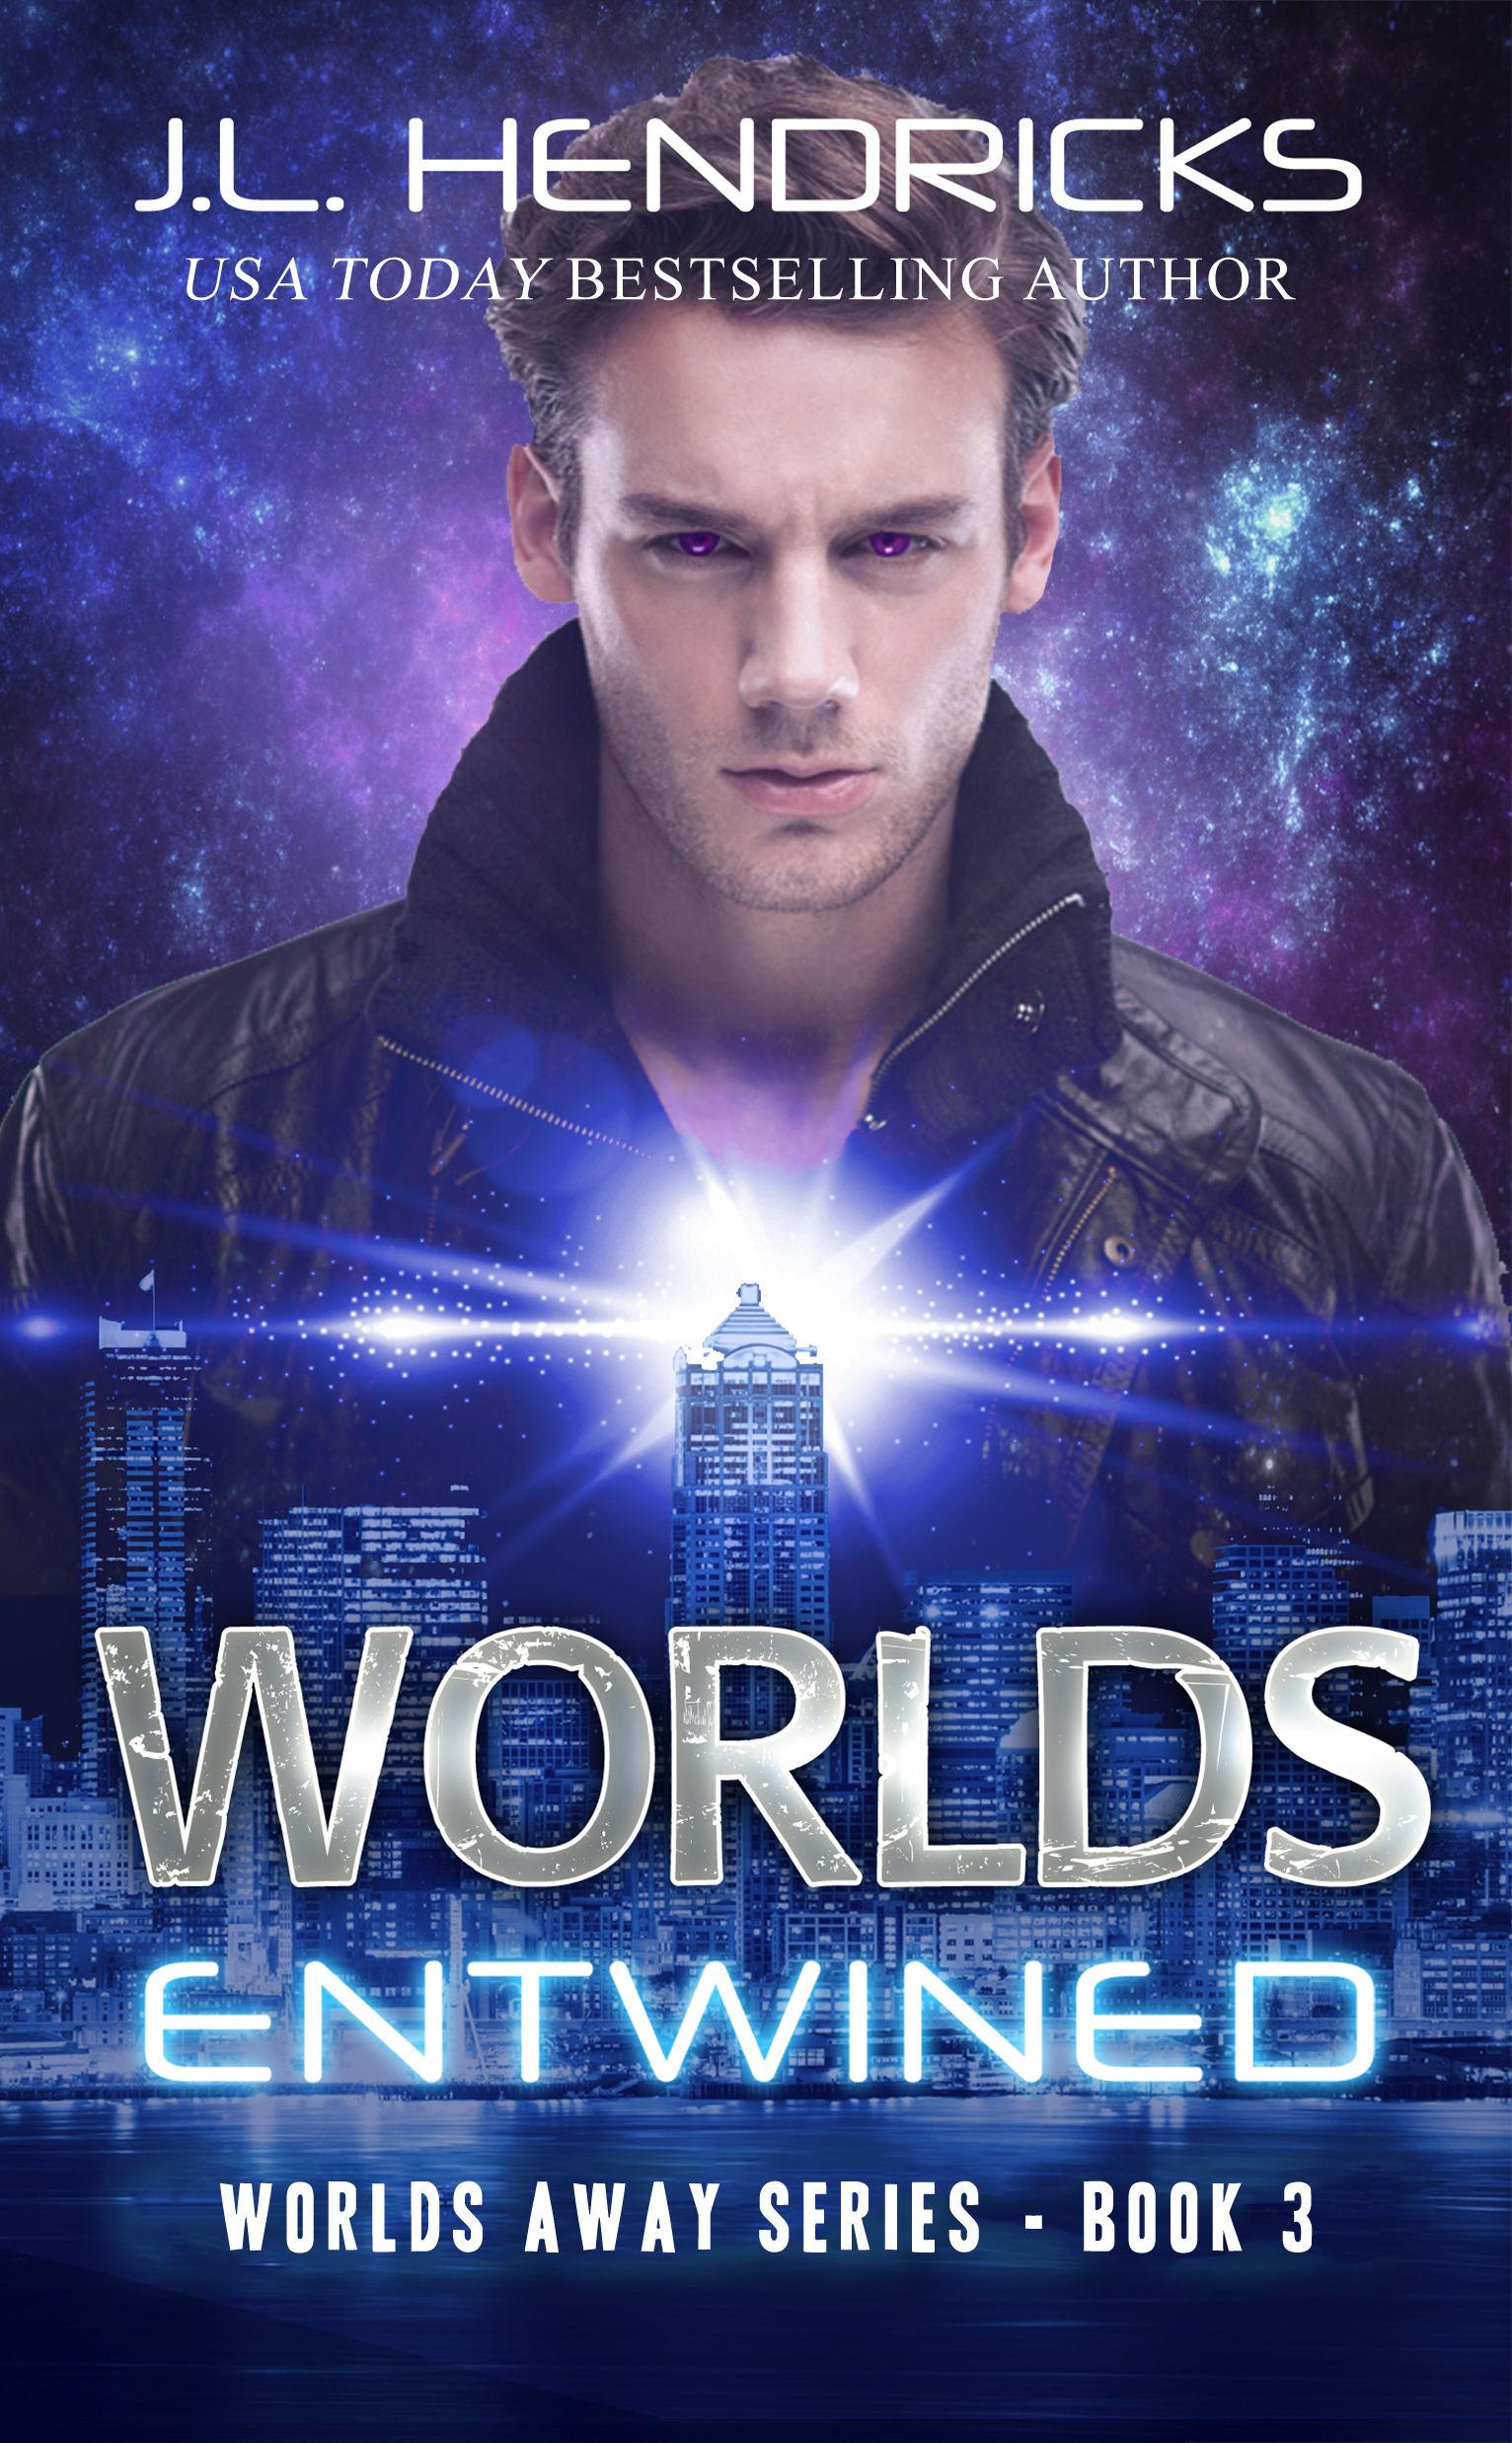 The Worlds Away Series Book 3: Worlds Entwined